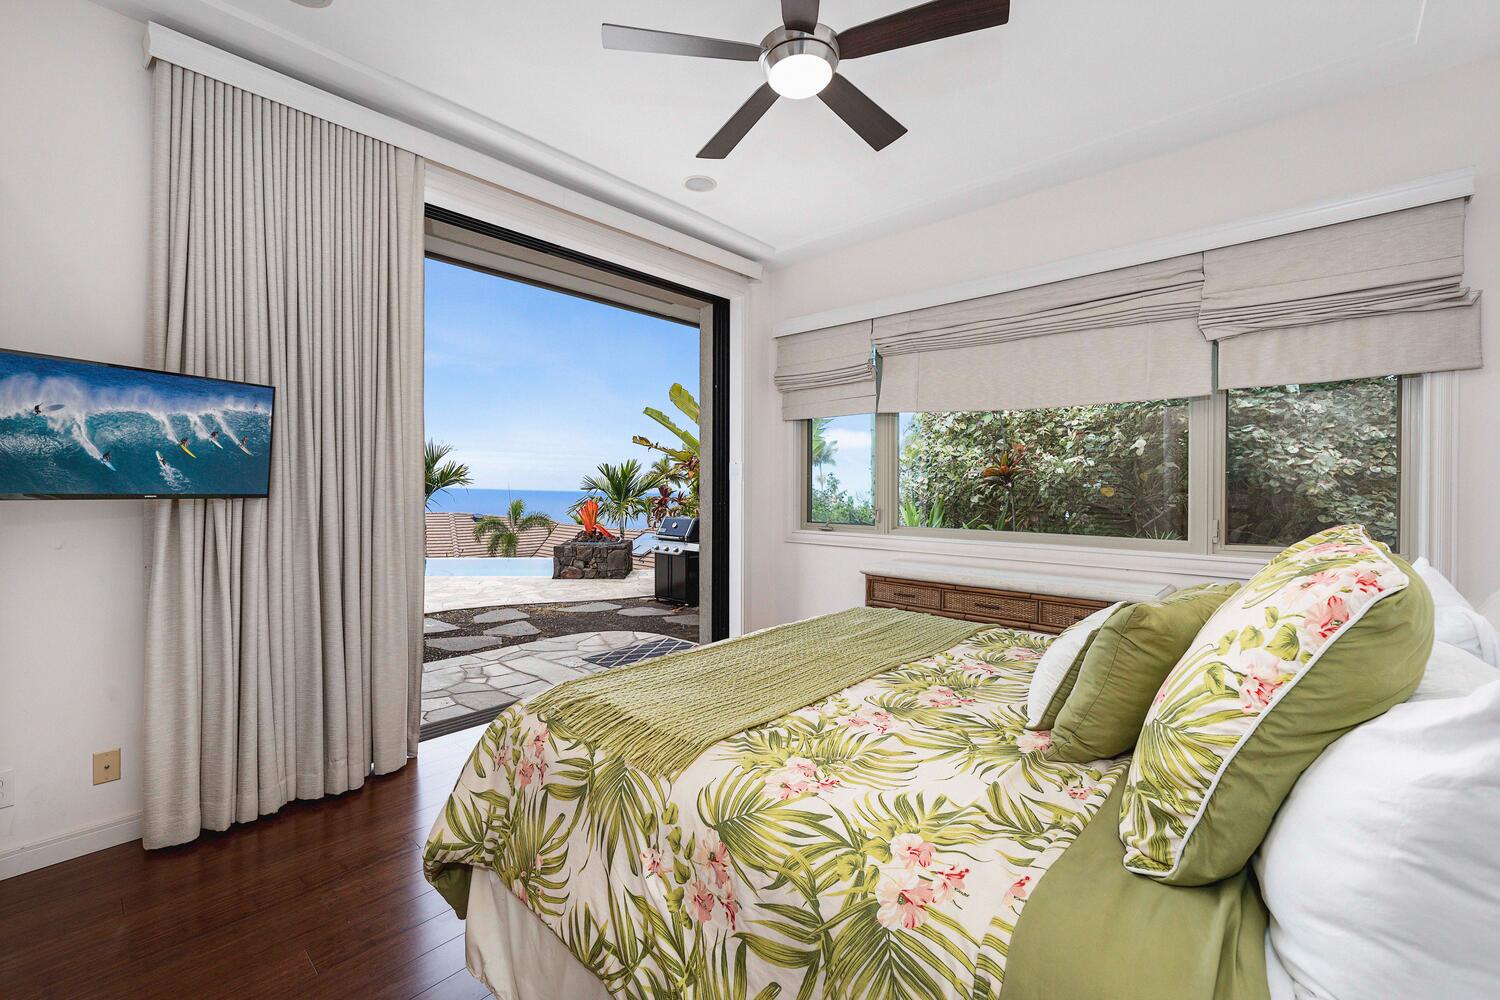 Kailua Kona Vacation Rentals, Blue Hawaii - Ocean and Pool views from the Guest bedroom.